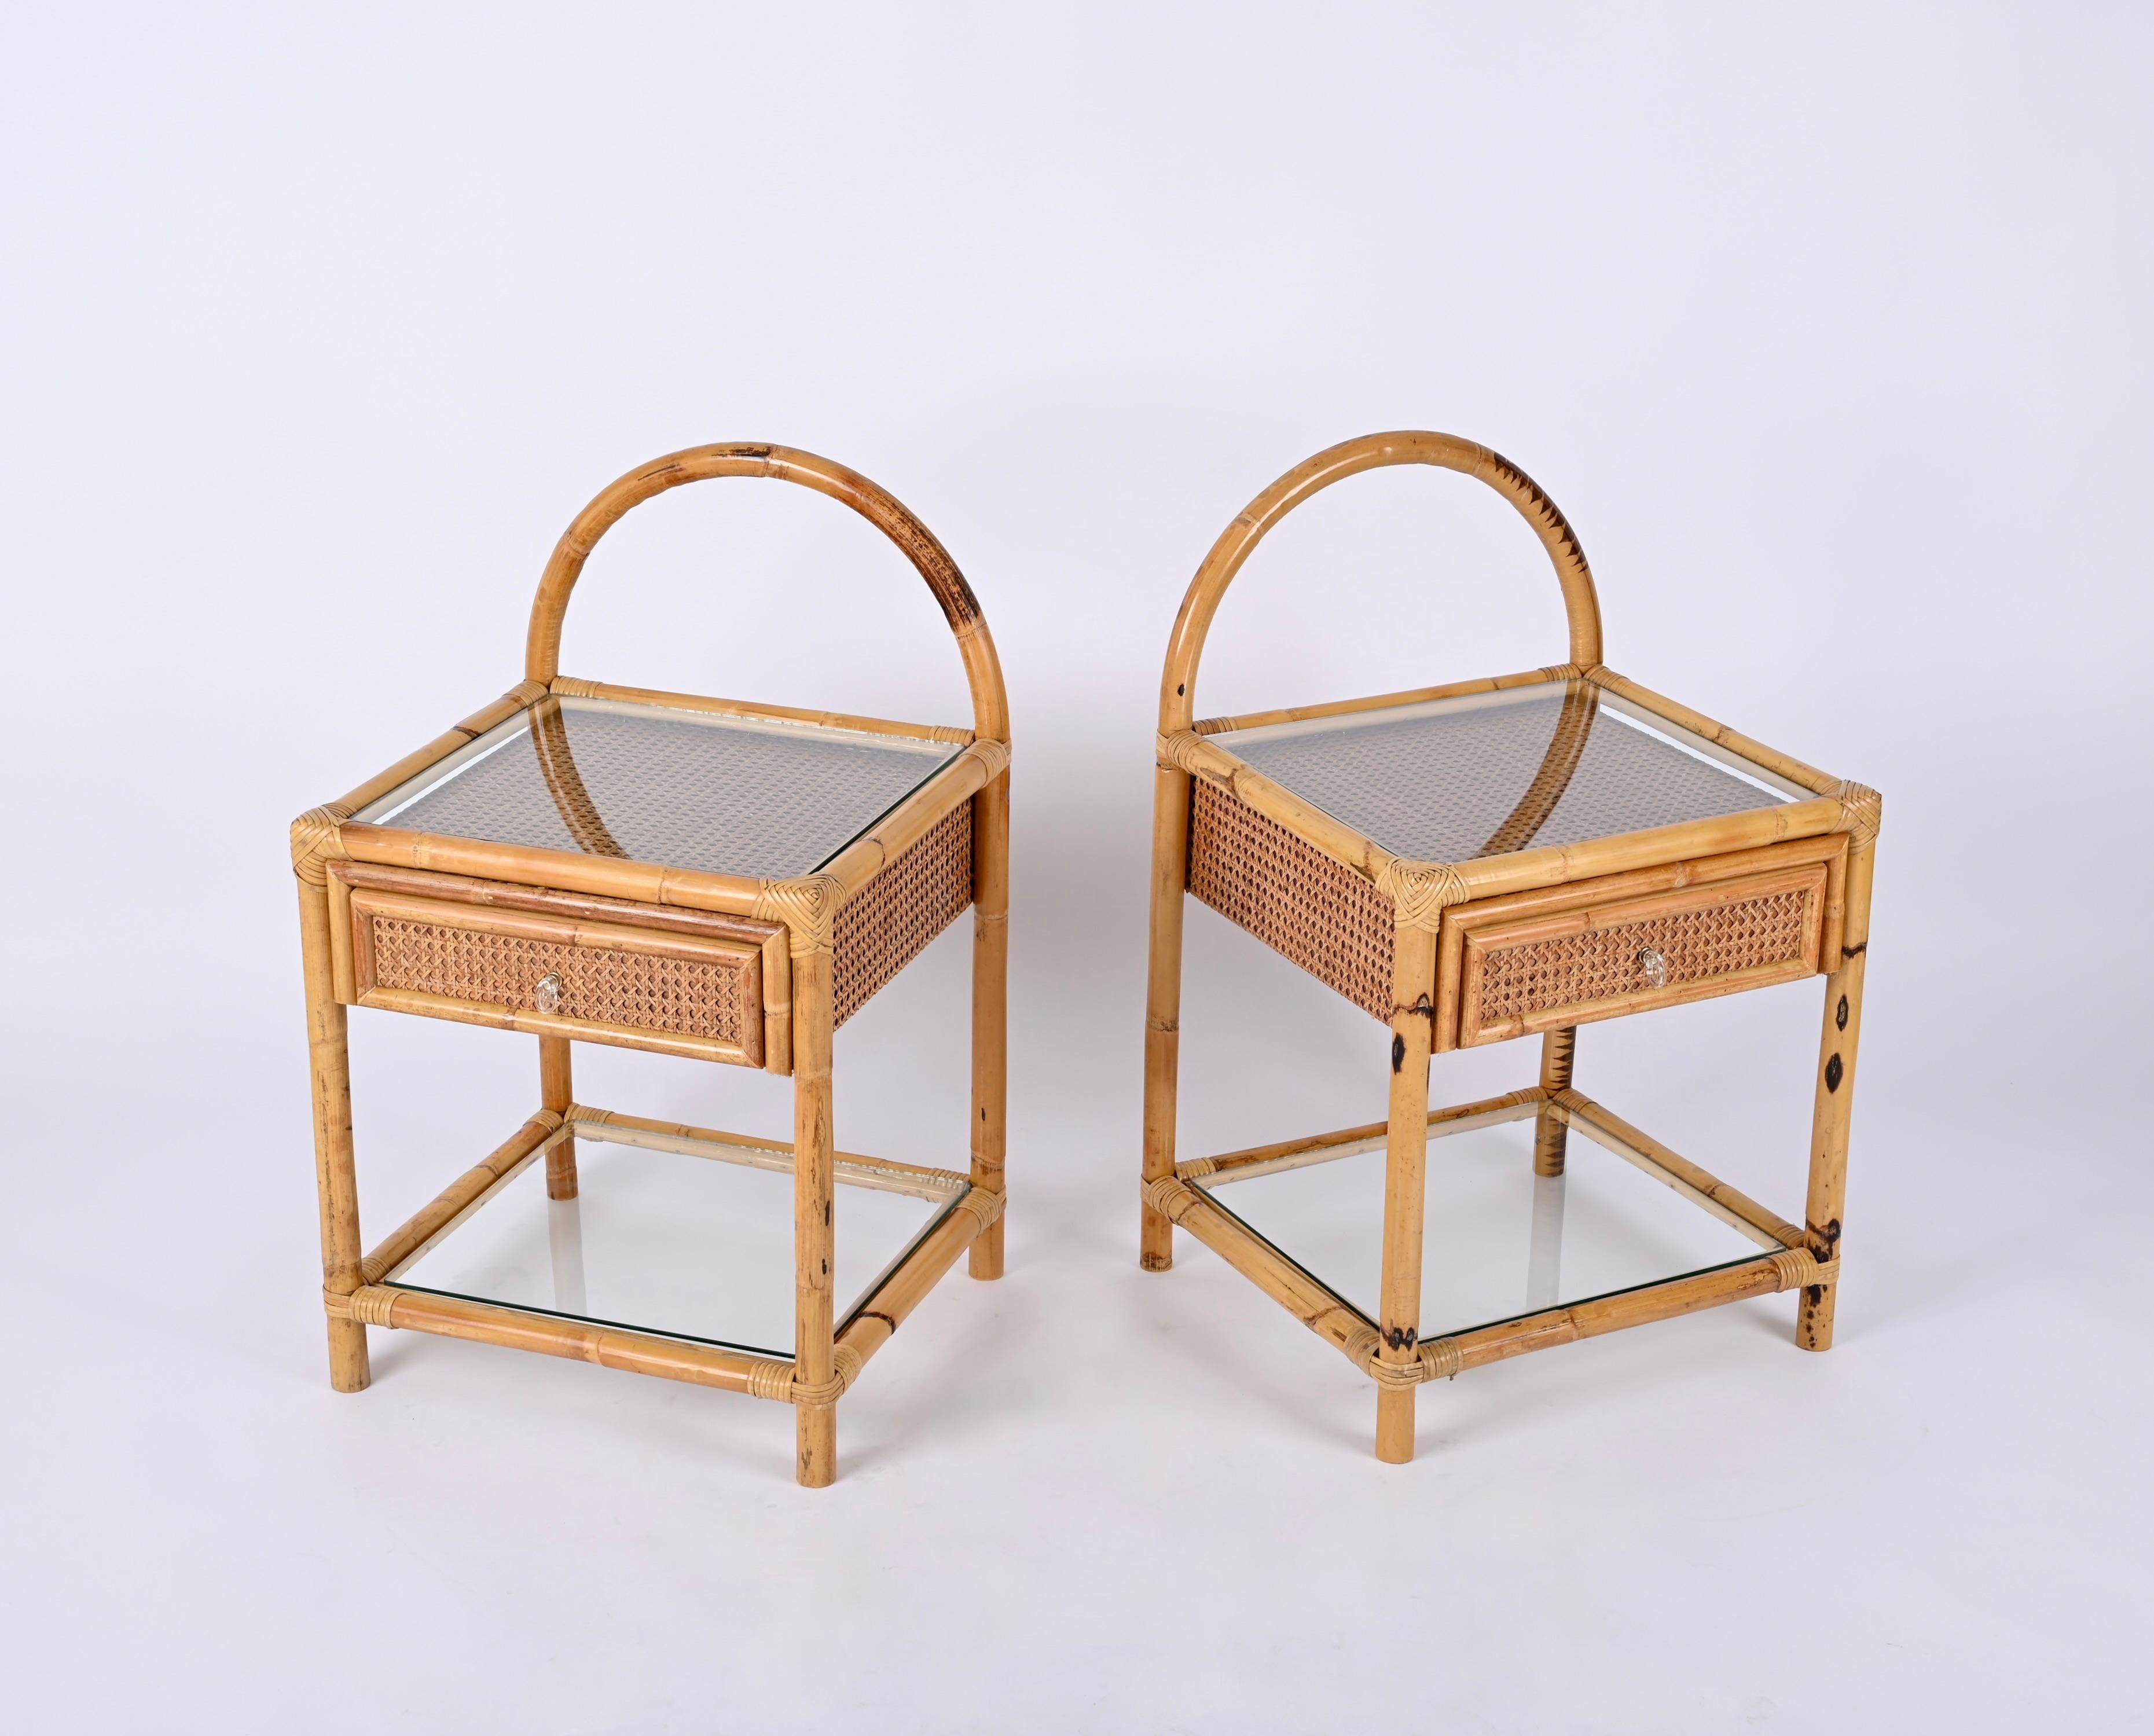 Pair of Mid-Century Bamboo, Rattan and Wicker Italian Bedside Tables, 1970s For Sale 9